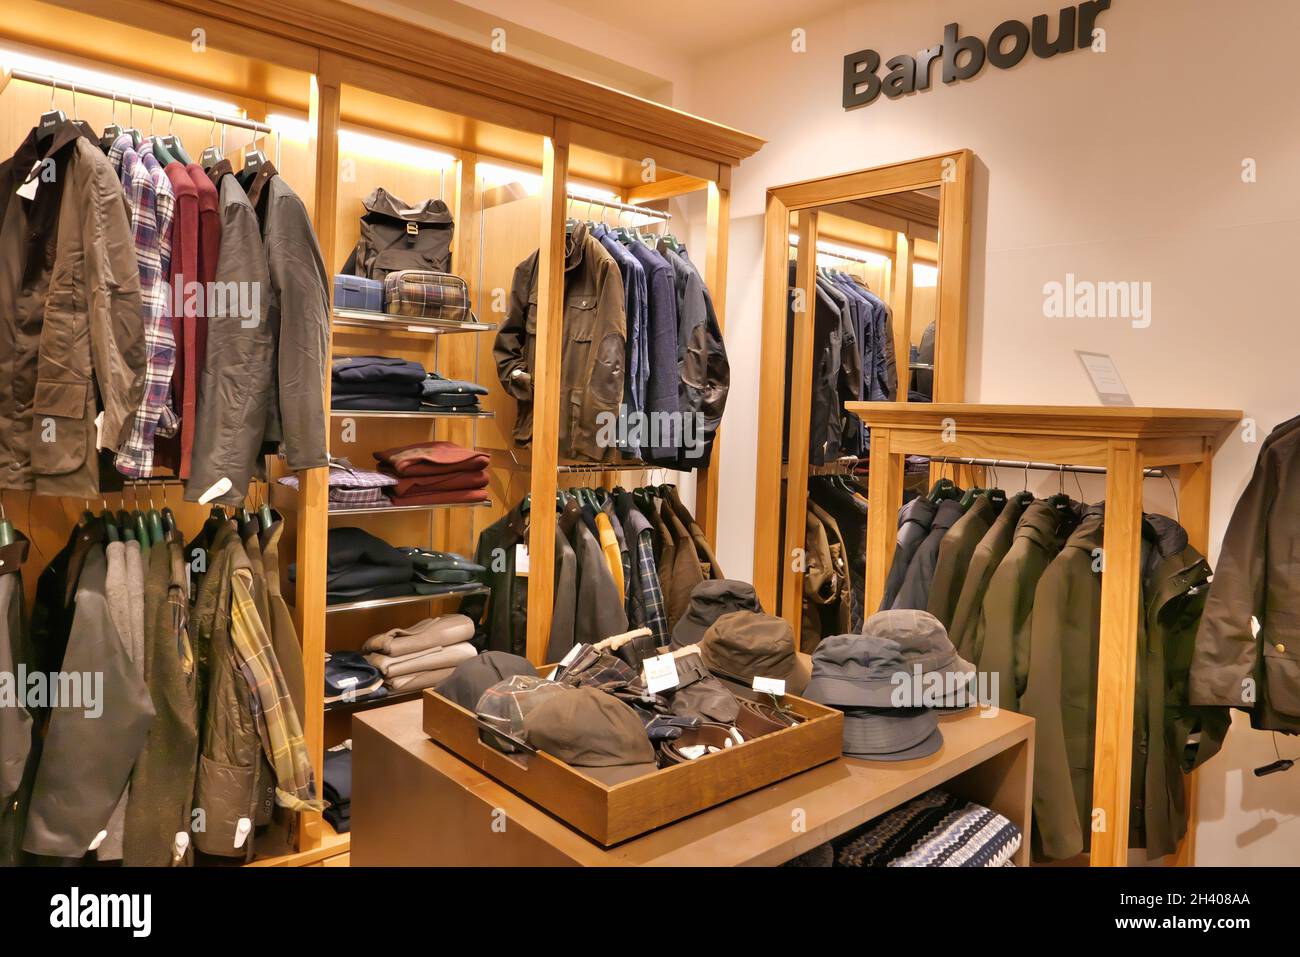 BARBOUR CLOTHING ON DISPLAY INSIDE THE FASHION STORE Stock Photo - Alamy